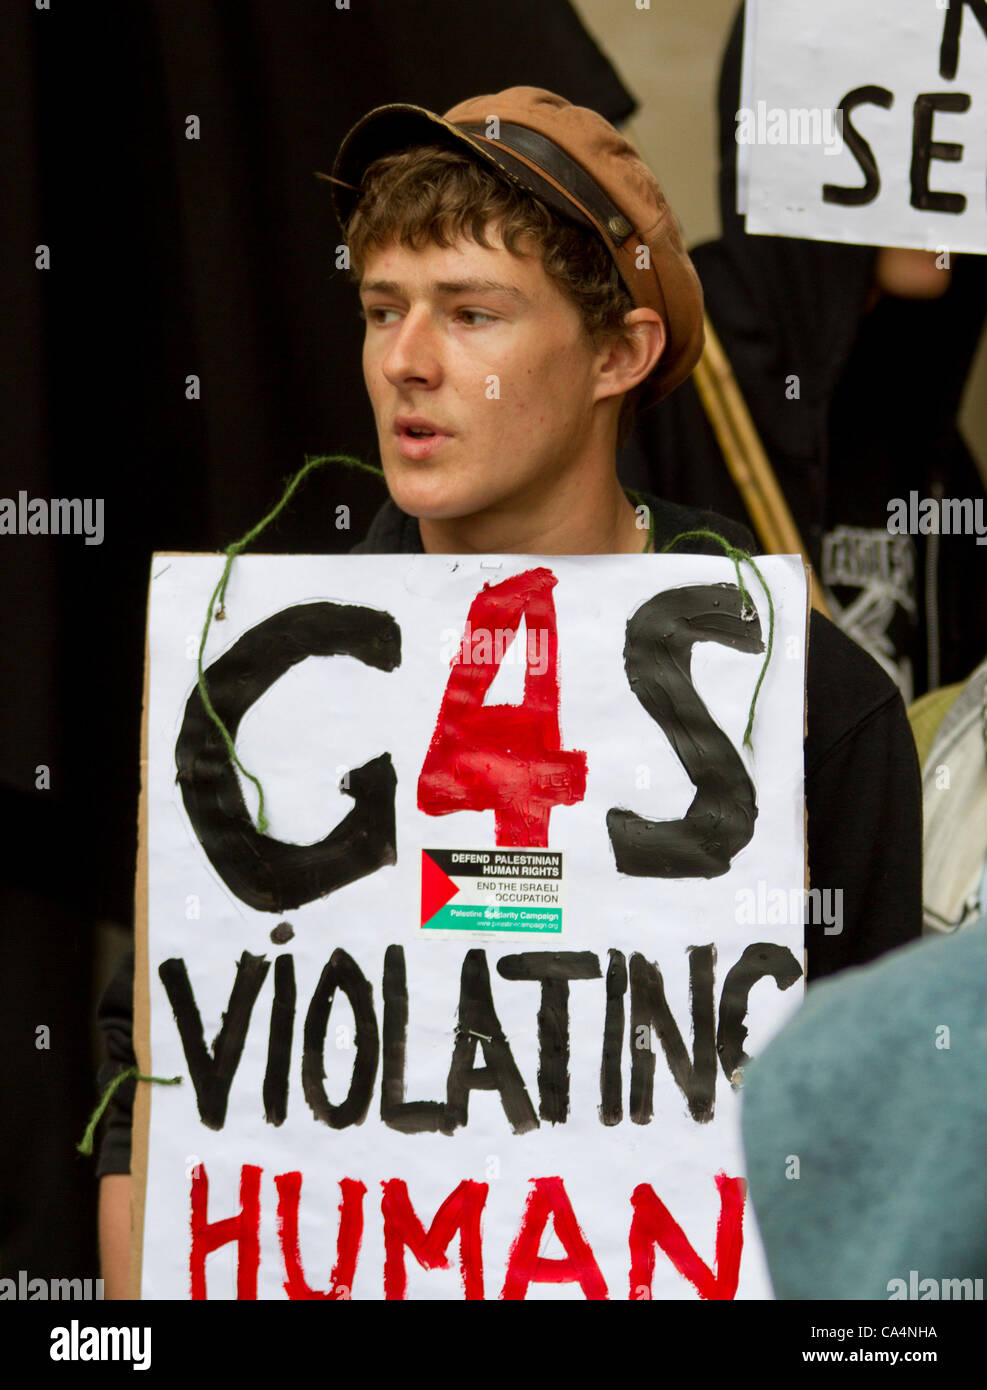 London, UK. 07th June 2012. Activists from different movements gathered outside London Stock Exchange, Paternoster Square, London with signs where the private security company 'G4S' held the Annual General Meeting. Protesters accusing G4S of human rights abuse throughout the world. Stock Photo